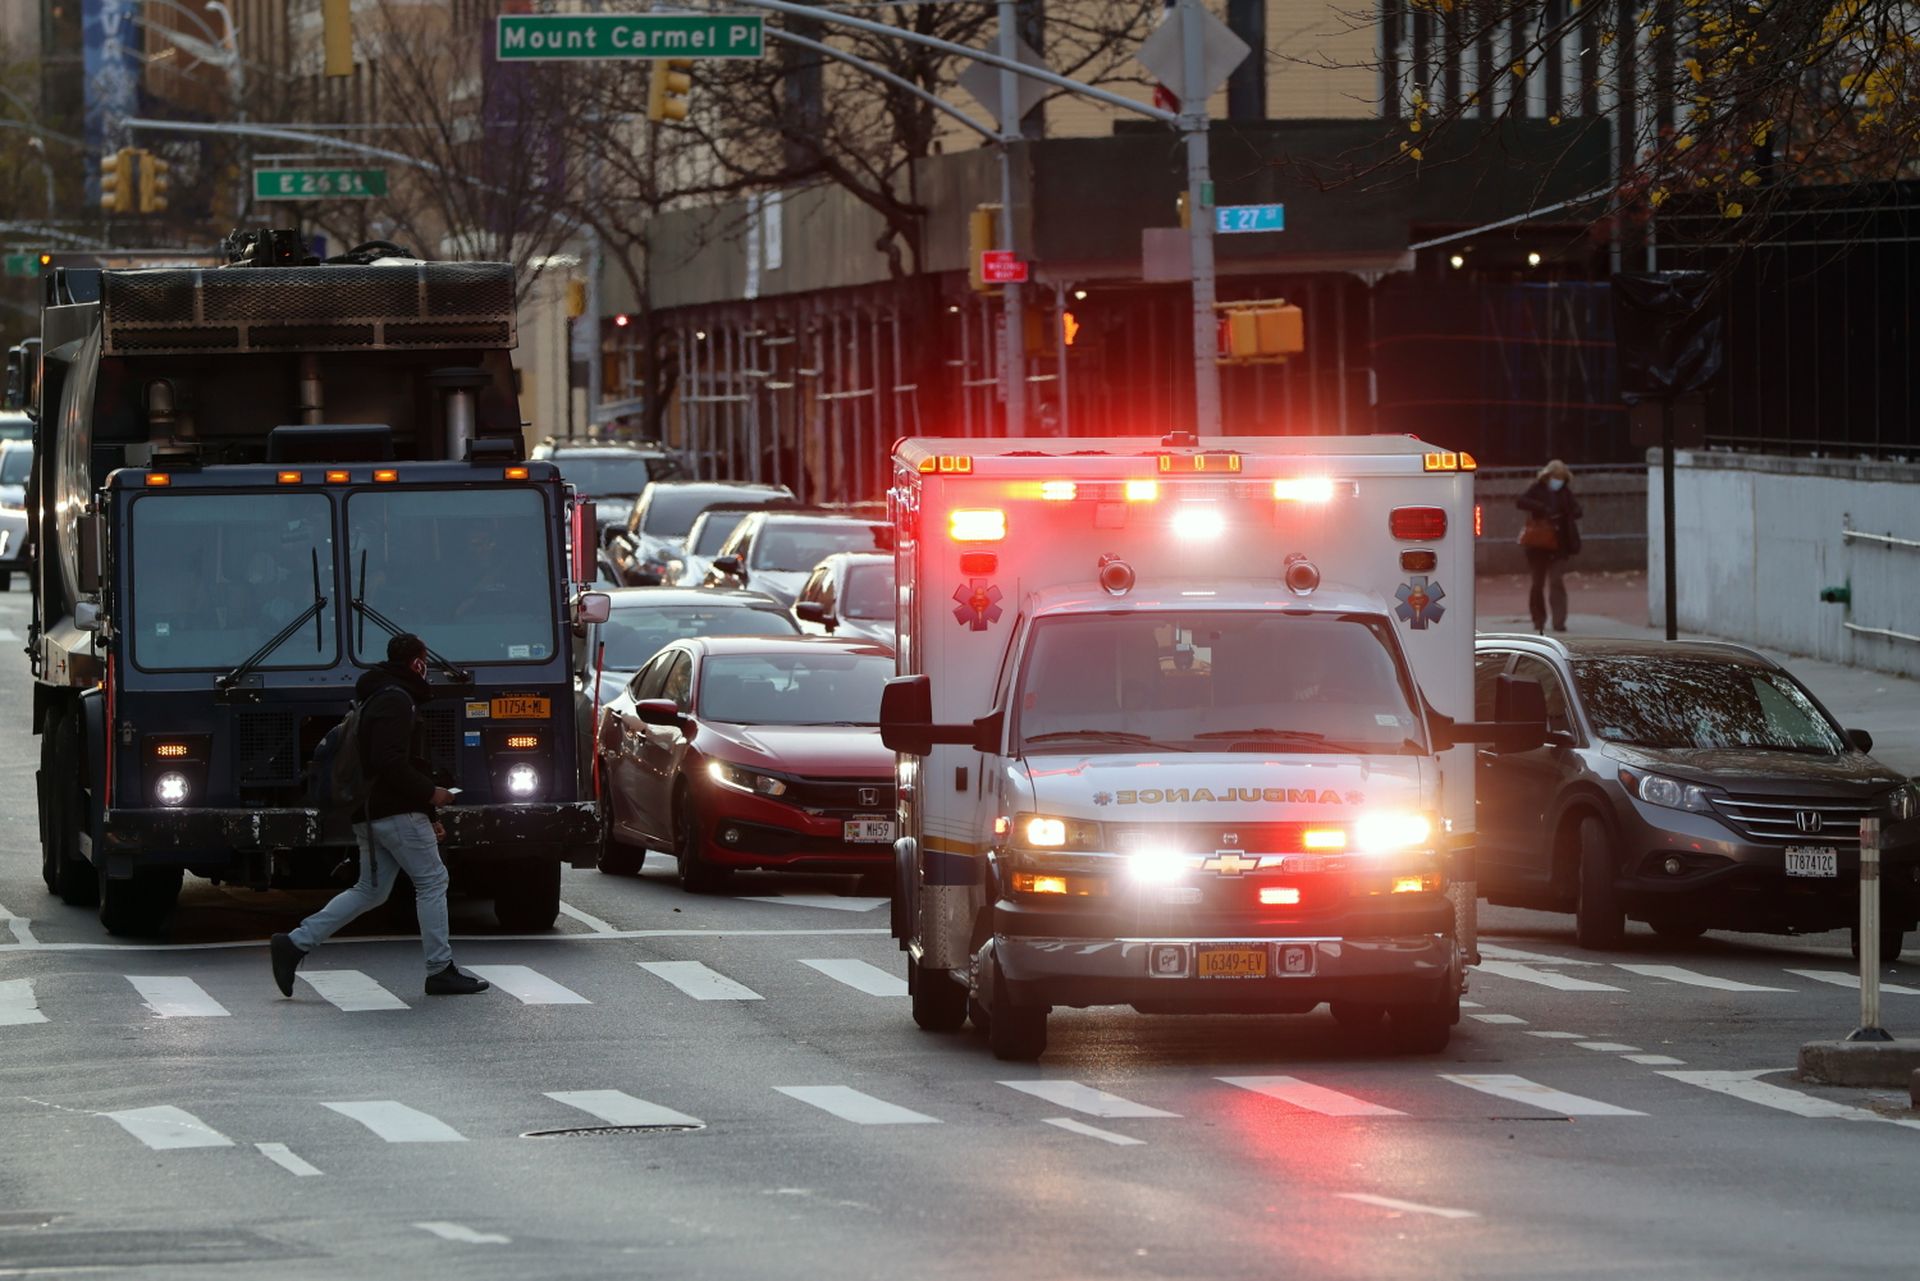 An ambulance drives through the streets of Manhattan on Dec. 02, 2020, in New York City. (Photo by Spencer Platt/Getty Images)